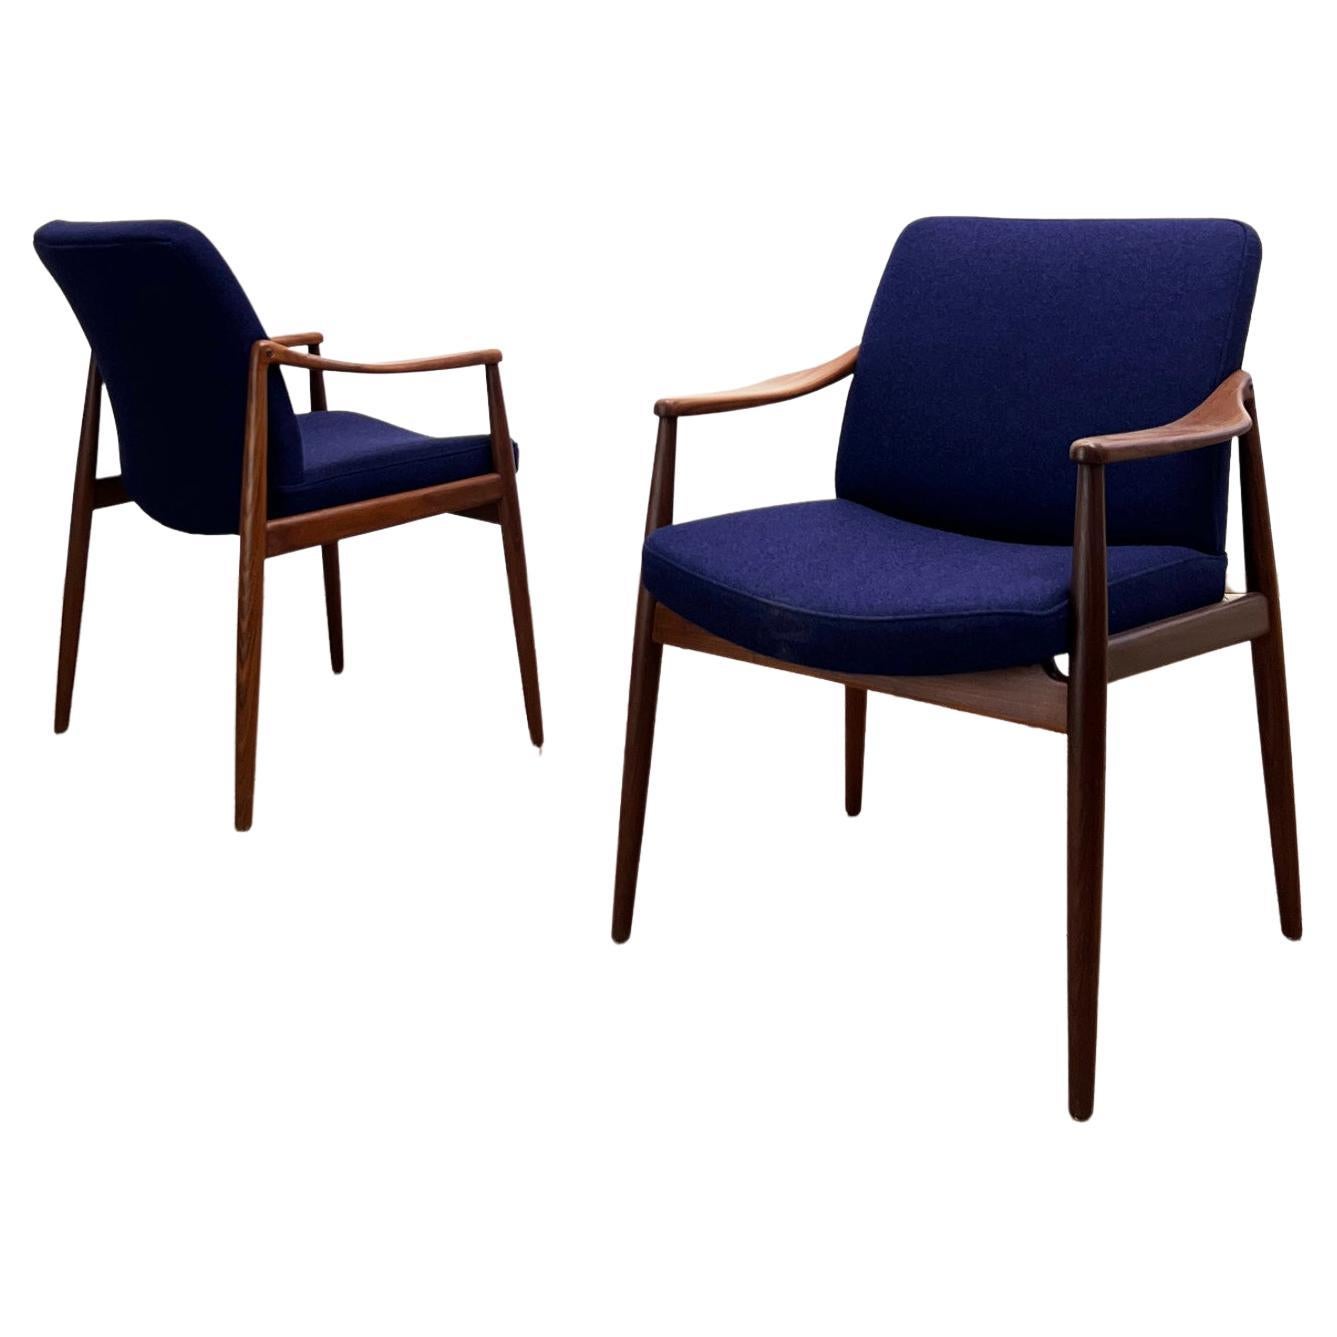 Two Mid-Century Modern Teak Armchairs by Hartmut Lohmeyer for Wilkhahn, 1950s For Sale